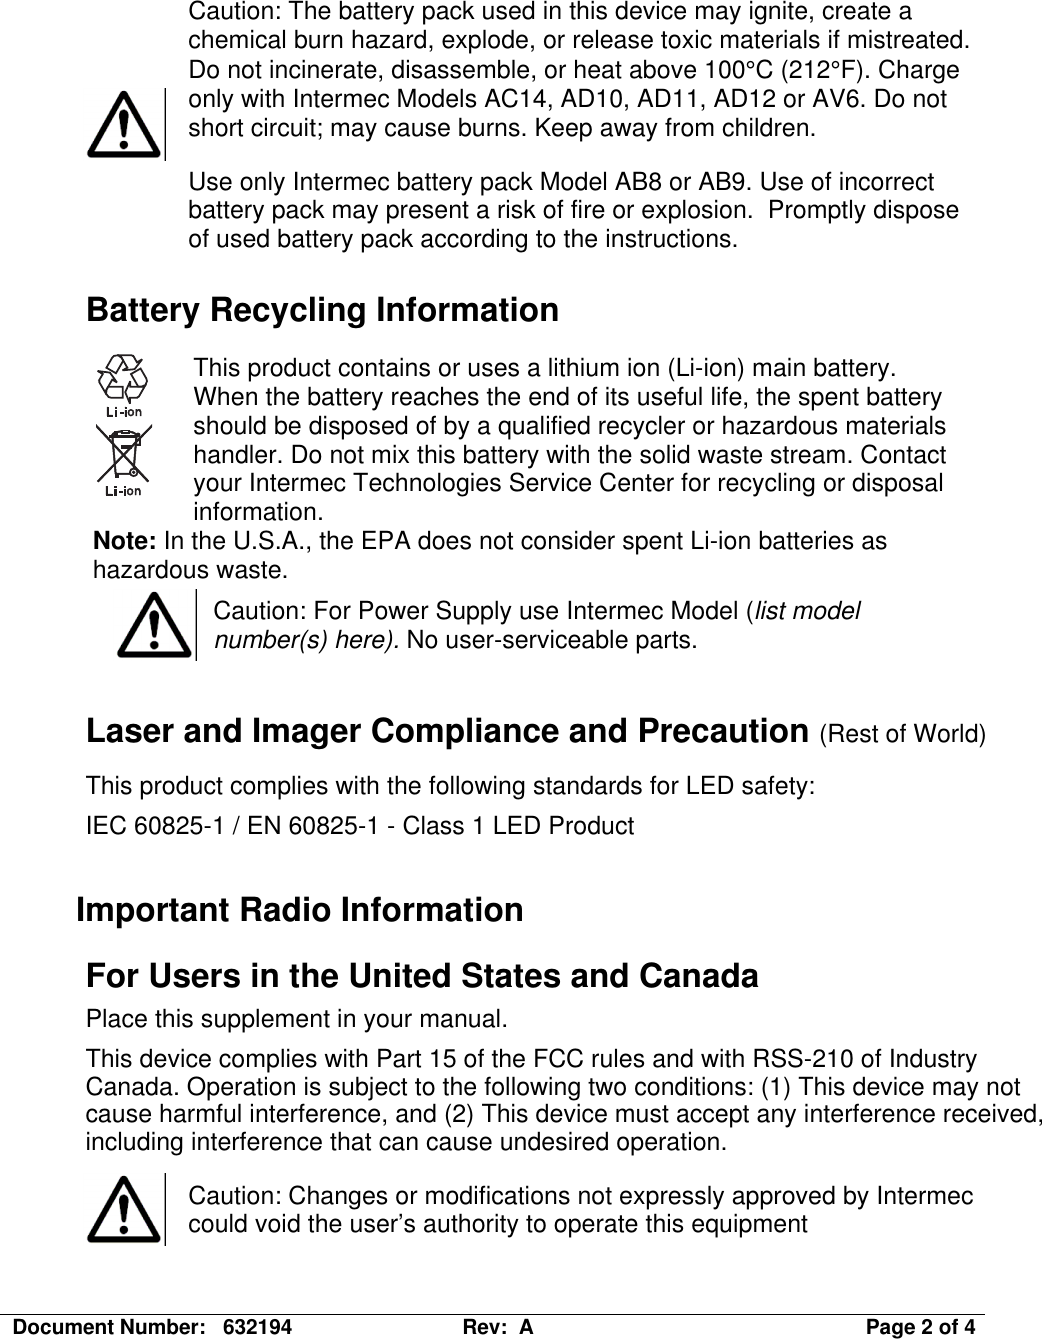 Document Number:   632194  Rev:  A   Page 2 of 4   Caution: The battery pack used in this device may ignite, create a chemical burn hazard, explode, or release toxic materials if mistreated. Do not incinerate, disassemble, or heat above 100°C (212°F). Charge only with Intermec Models AC14, AD10, AD11, AD12 or AV6. Do not short circuit; may cause burns. Keep away from children. Use only Intermec battery pack Model AB8 or AB9. Use of incorrect battery pack may present a risk of fire or explosion.  Promptly dispose of used battery pack according to the instructions. Battery Recycling Information  This product contains or uses a lithium ion (Li-ion) main battery. When the battery reaches the end of its useful life, the spent battery should be disposed of by a qualified recycler or hazardous materials handler. Do not mix this battery with the solid waste stream. Contact your Intermec Technologies Service Center for recycling or disposal information. Note: In the U.S.A., the EPA does not consider spent Li-ion batteries as hazardous waste.  Caution: For Power Supply use Intermec Model (list model number(s) here). No user-serviceable parts.  Laser and Imager Compliance and Precaution (Rest of World) This product complies with the following standards for LED safety: IEC 60825-1 / EN 60825-1 - Class 1 LED Product  Important Radio Information For Users in the United States and Canada Place this supplement in your manual. This device complies with Part 15 of the FCC rules and with RSS-210 of Industry Canada. Operation is subject to the following two conditions: (1) This device may not cause harmful interference, and (2) This device must accept any interference received, including interference that can cause undesired operation.   Caution: Changes or modifications not expressly approved by Intermec could void the user’s authority to operate this equipment  